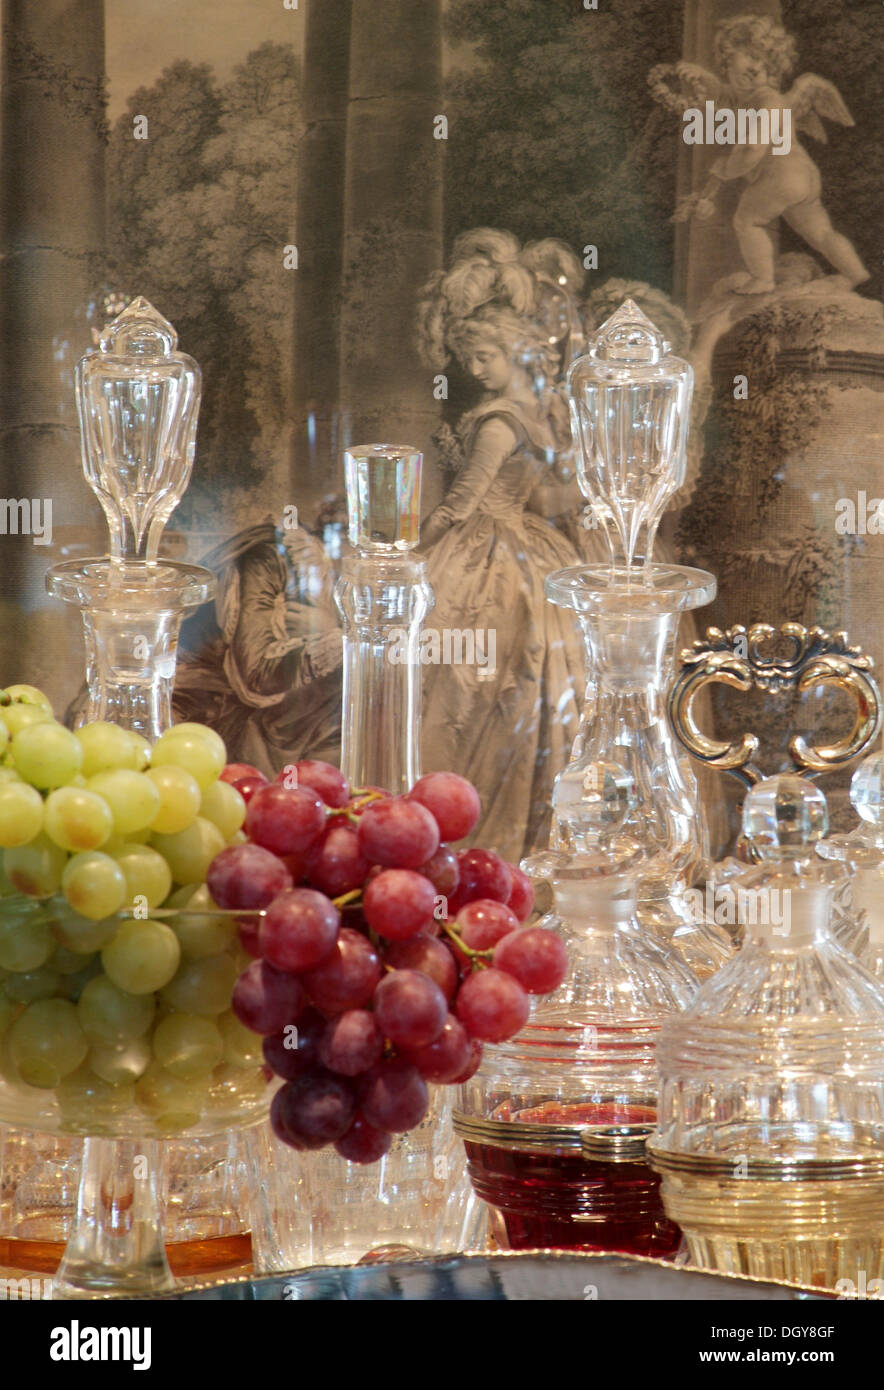 Still Life with grapes in fine, stylish glasses in front of antique glass decanters in a luxurious ambience Stock Photo